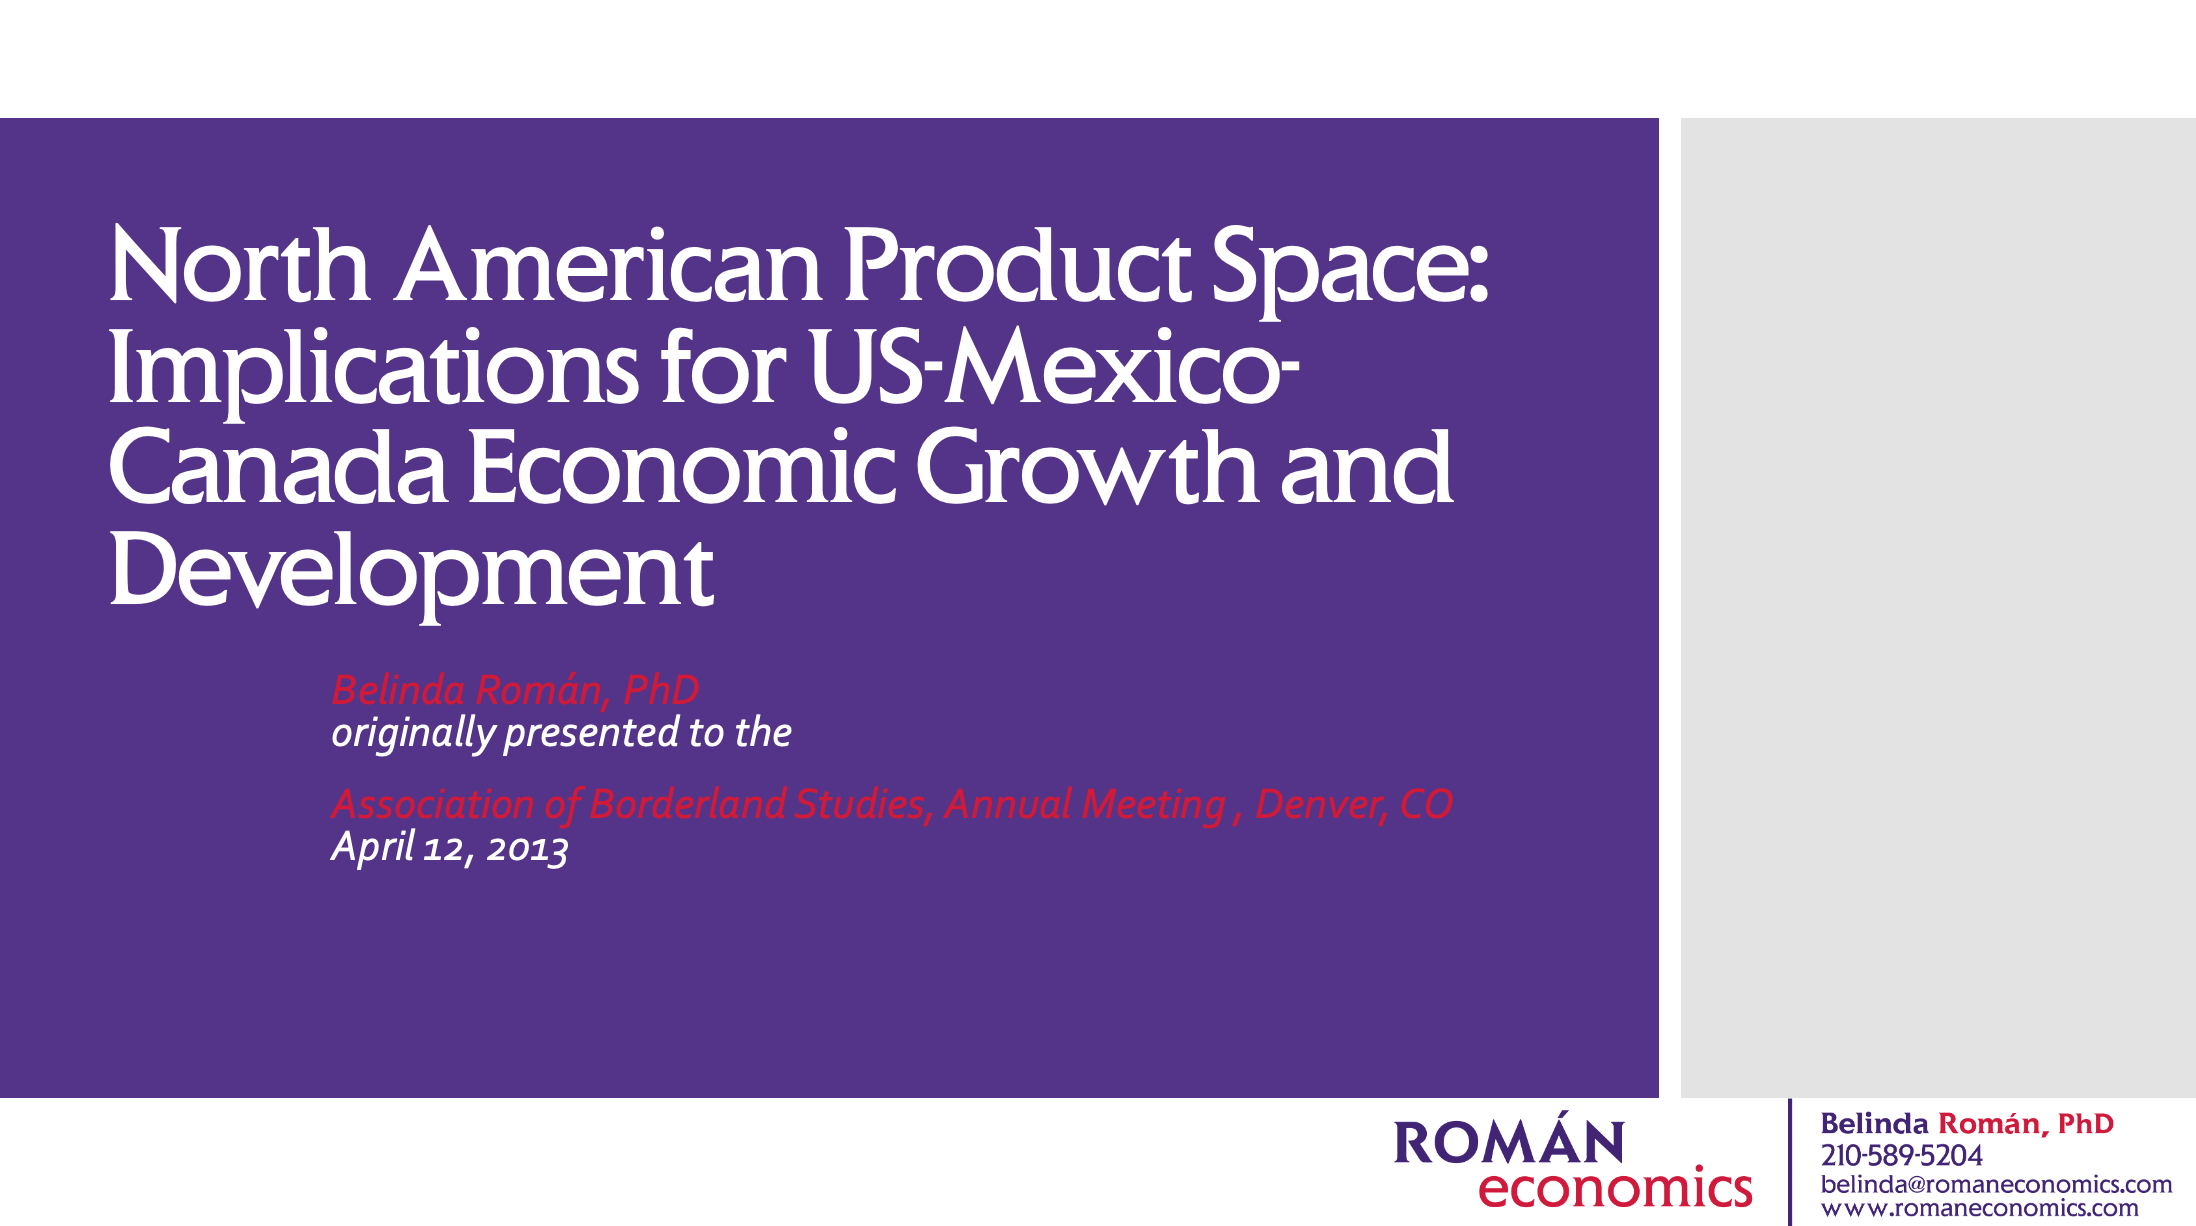 North American Product Space: